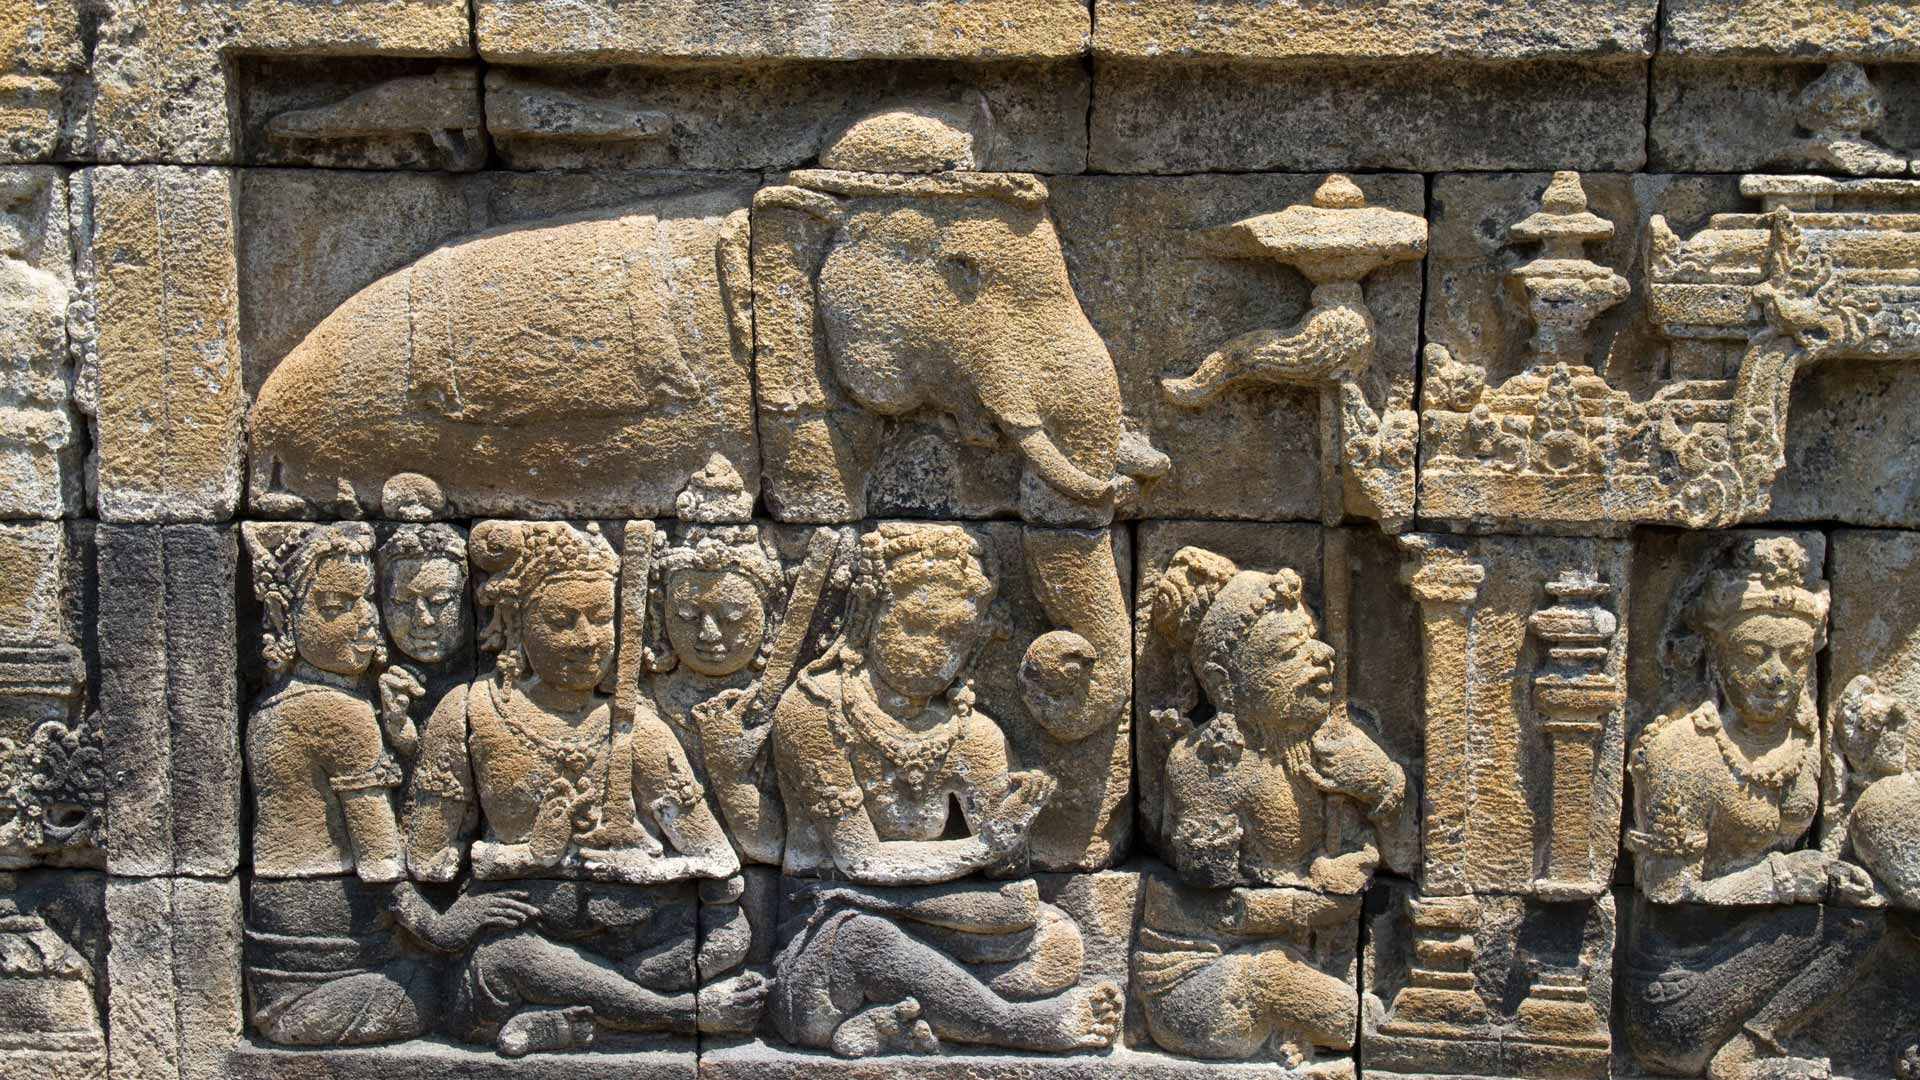 Bas-relief depicting the life of Buddha on a gallery of Candi Borobudur, Borobudur Temple Compounds, Central Java, Indonesia